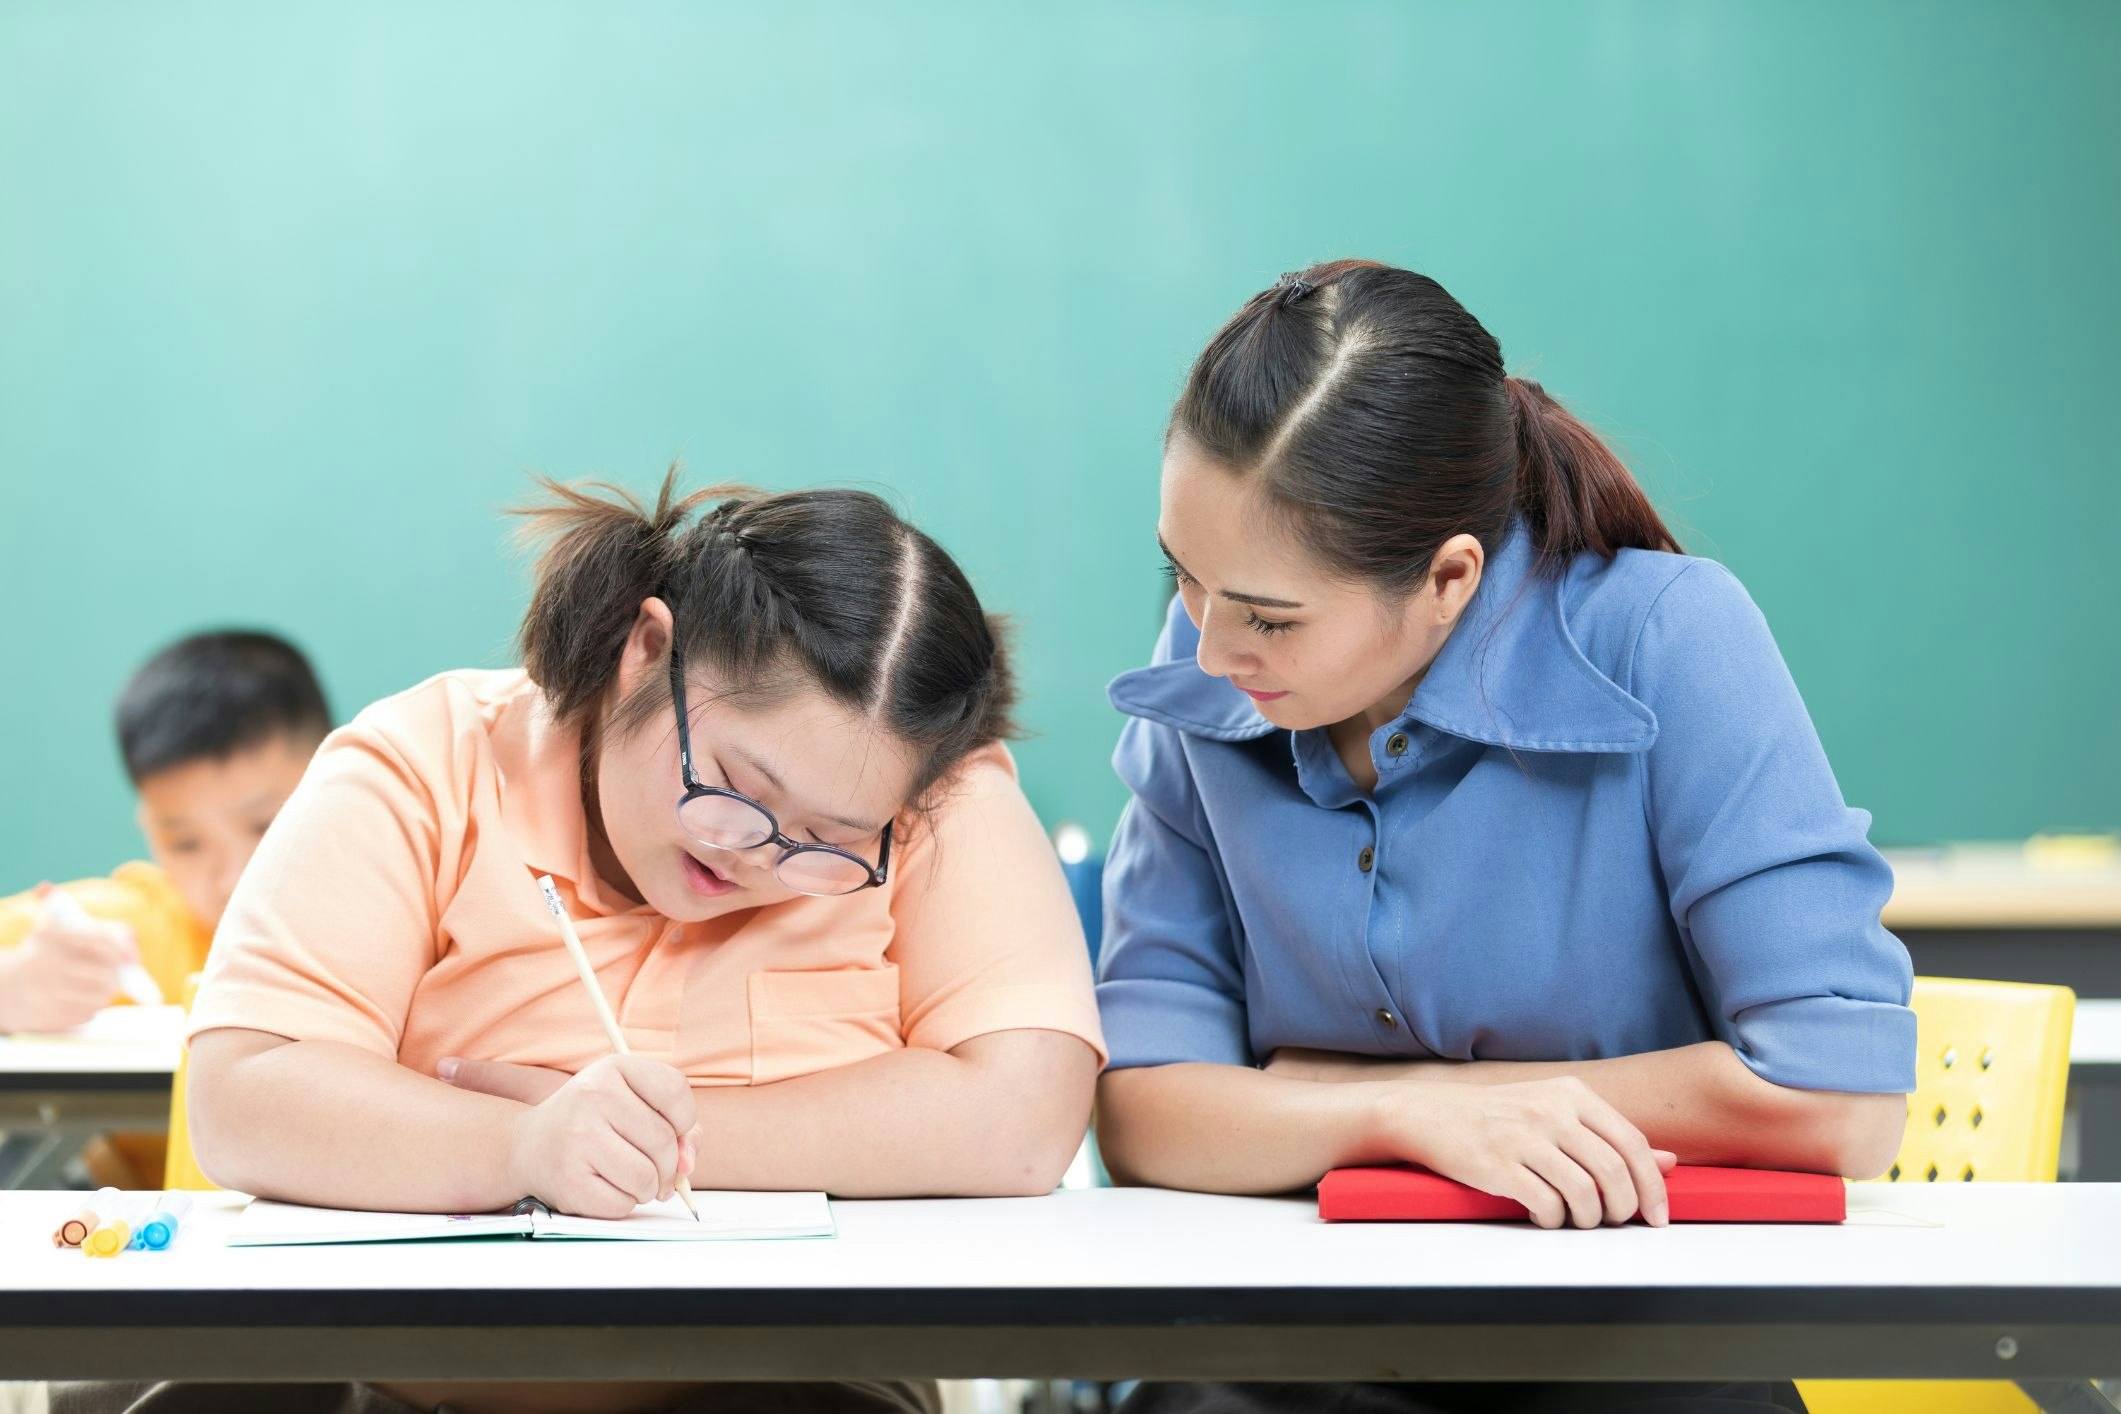 New research suggests that increasing teacher training to specialise in adapting education for students living with disability could improve their chances of success. [Source: Shutterstock]
